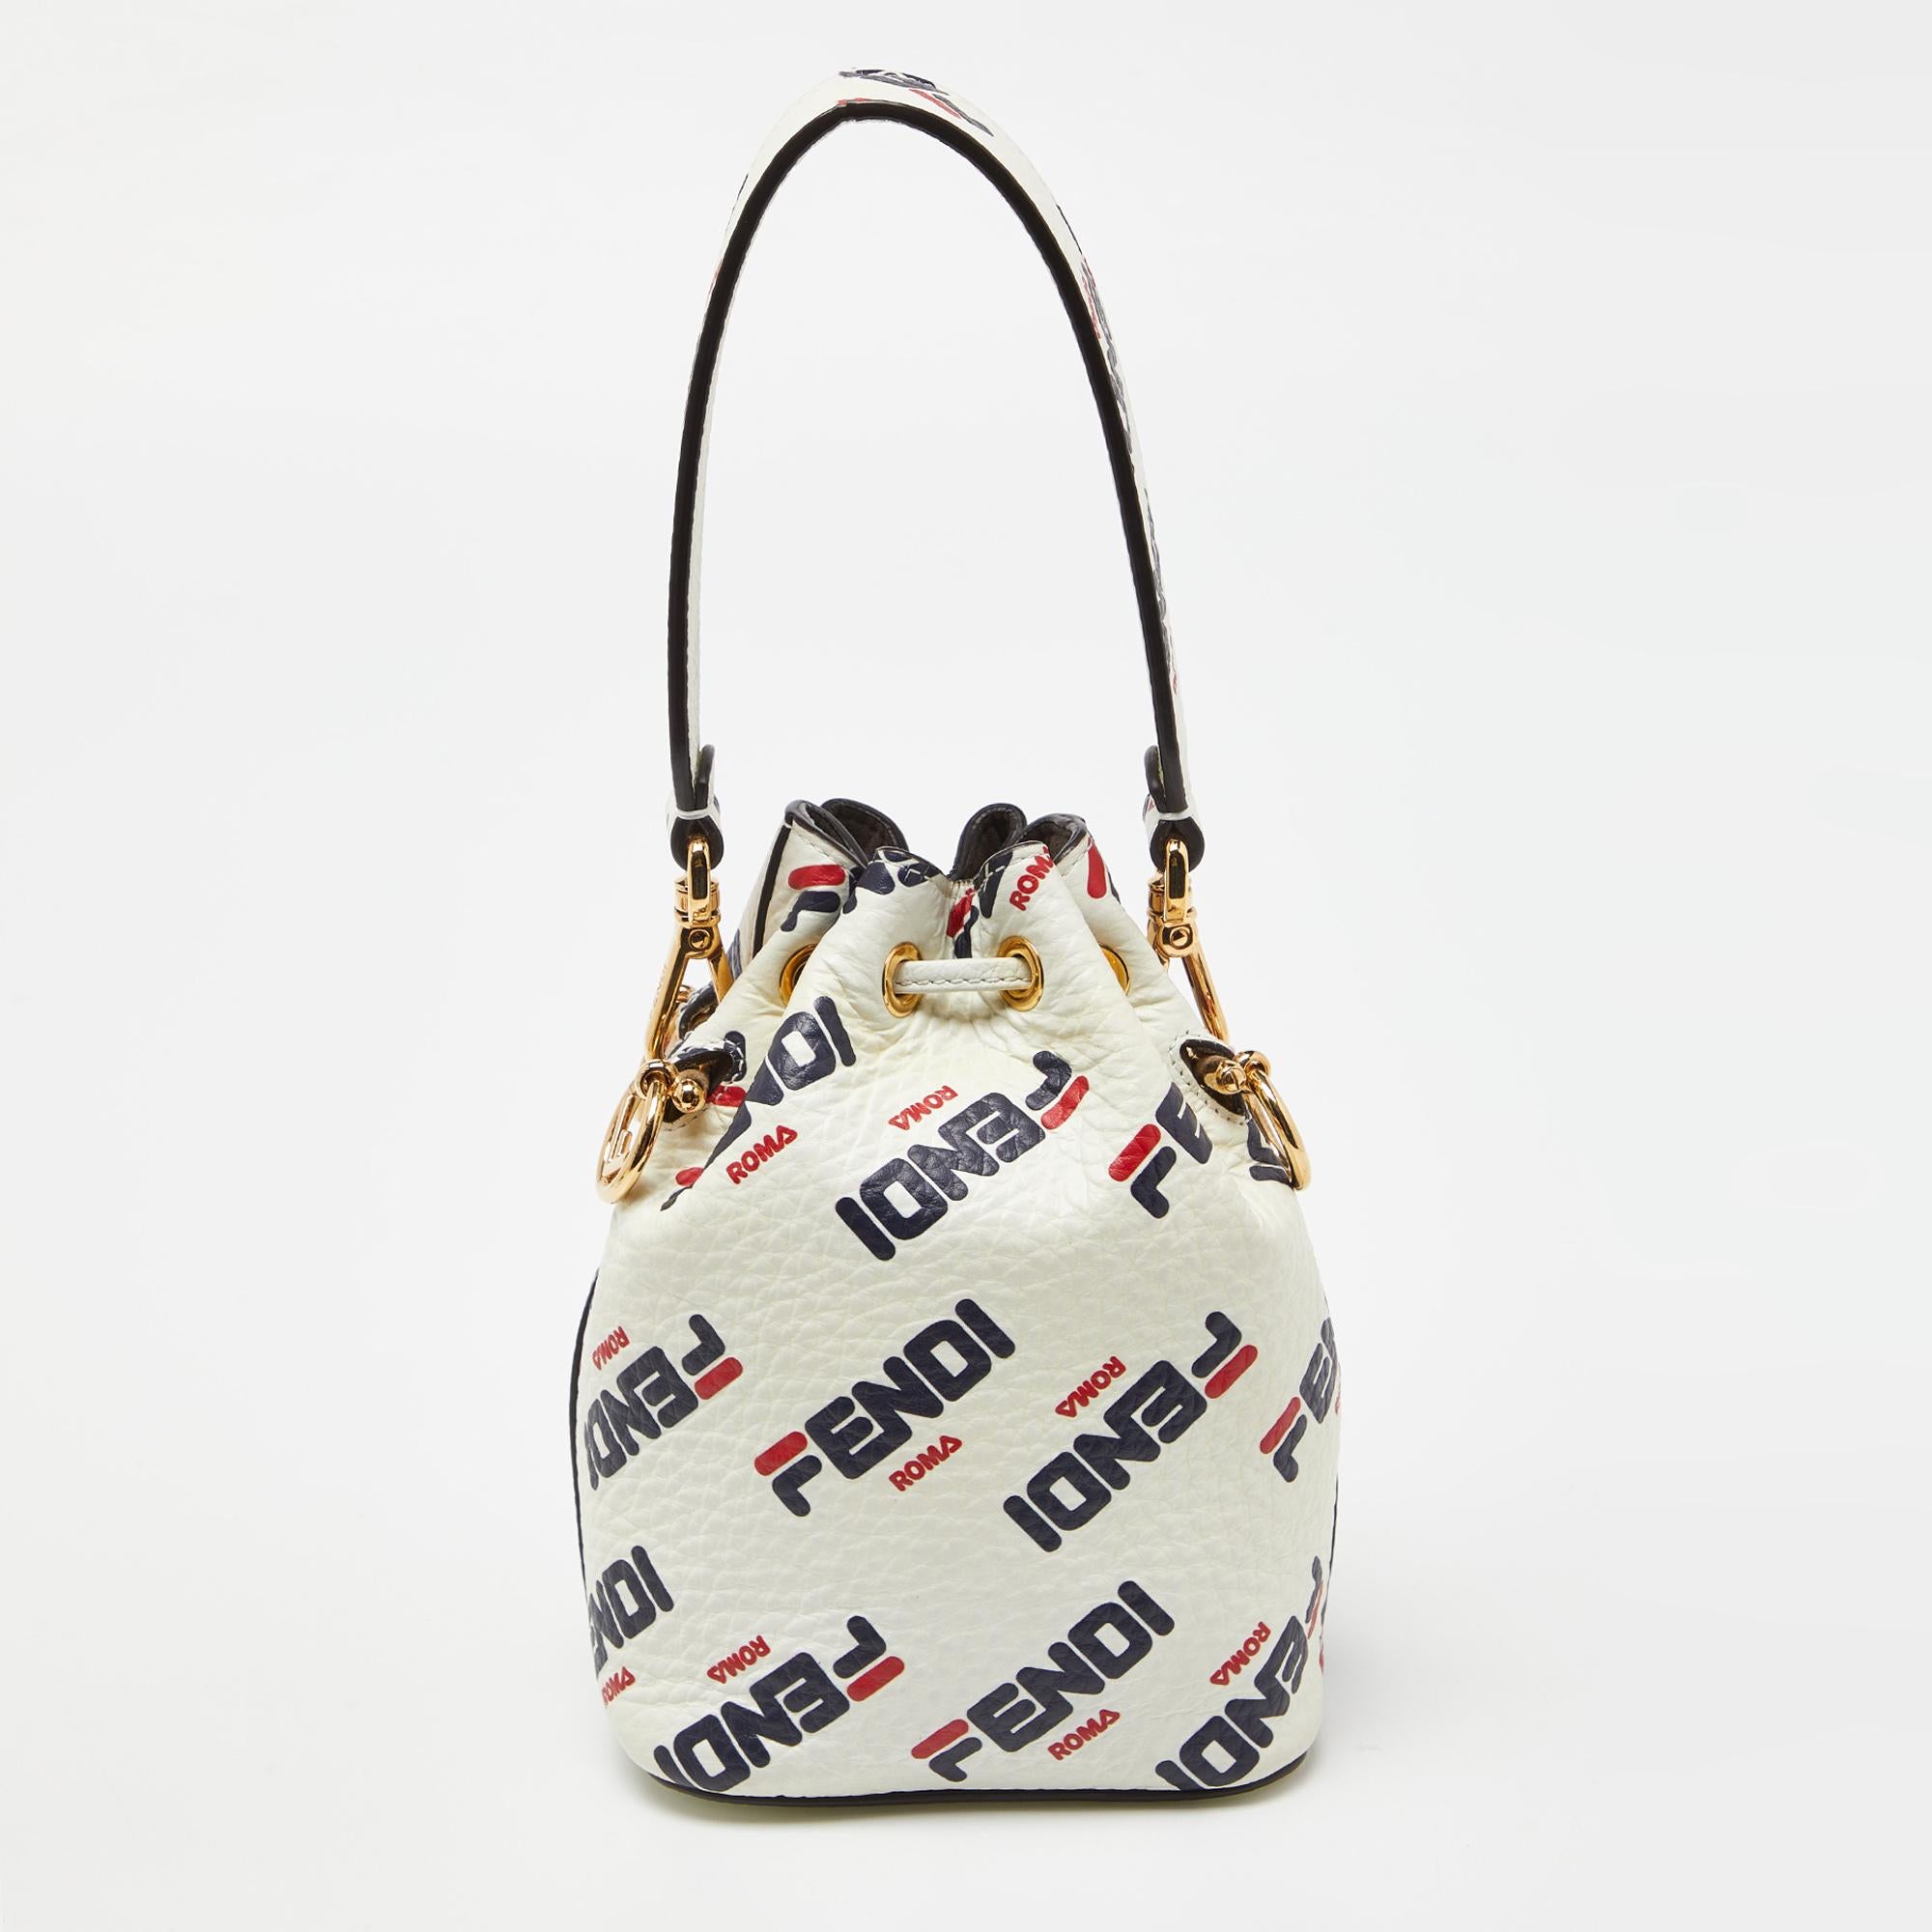 Indulge in luxury with this Fendi bucket bag. Meticulously crafted from premium materials, it combines exquisite design, impeccable craftsmanship, and timeless elegance. Elevate your style with this fashion accessory.

Includes: Original Dustbag,